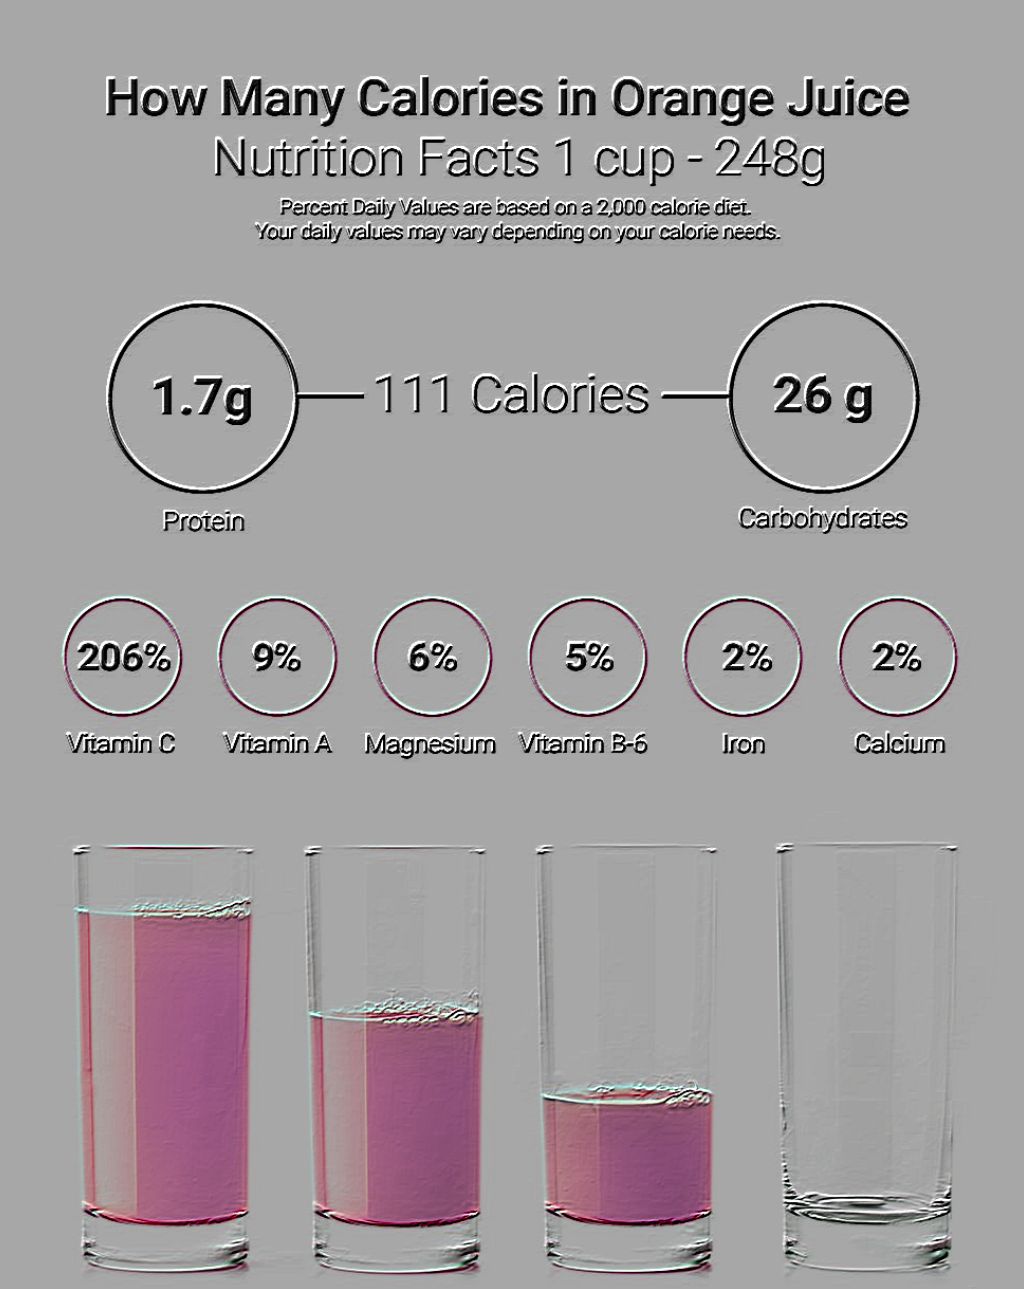 How Many Calories in Orange Juice Nutrition Facts